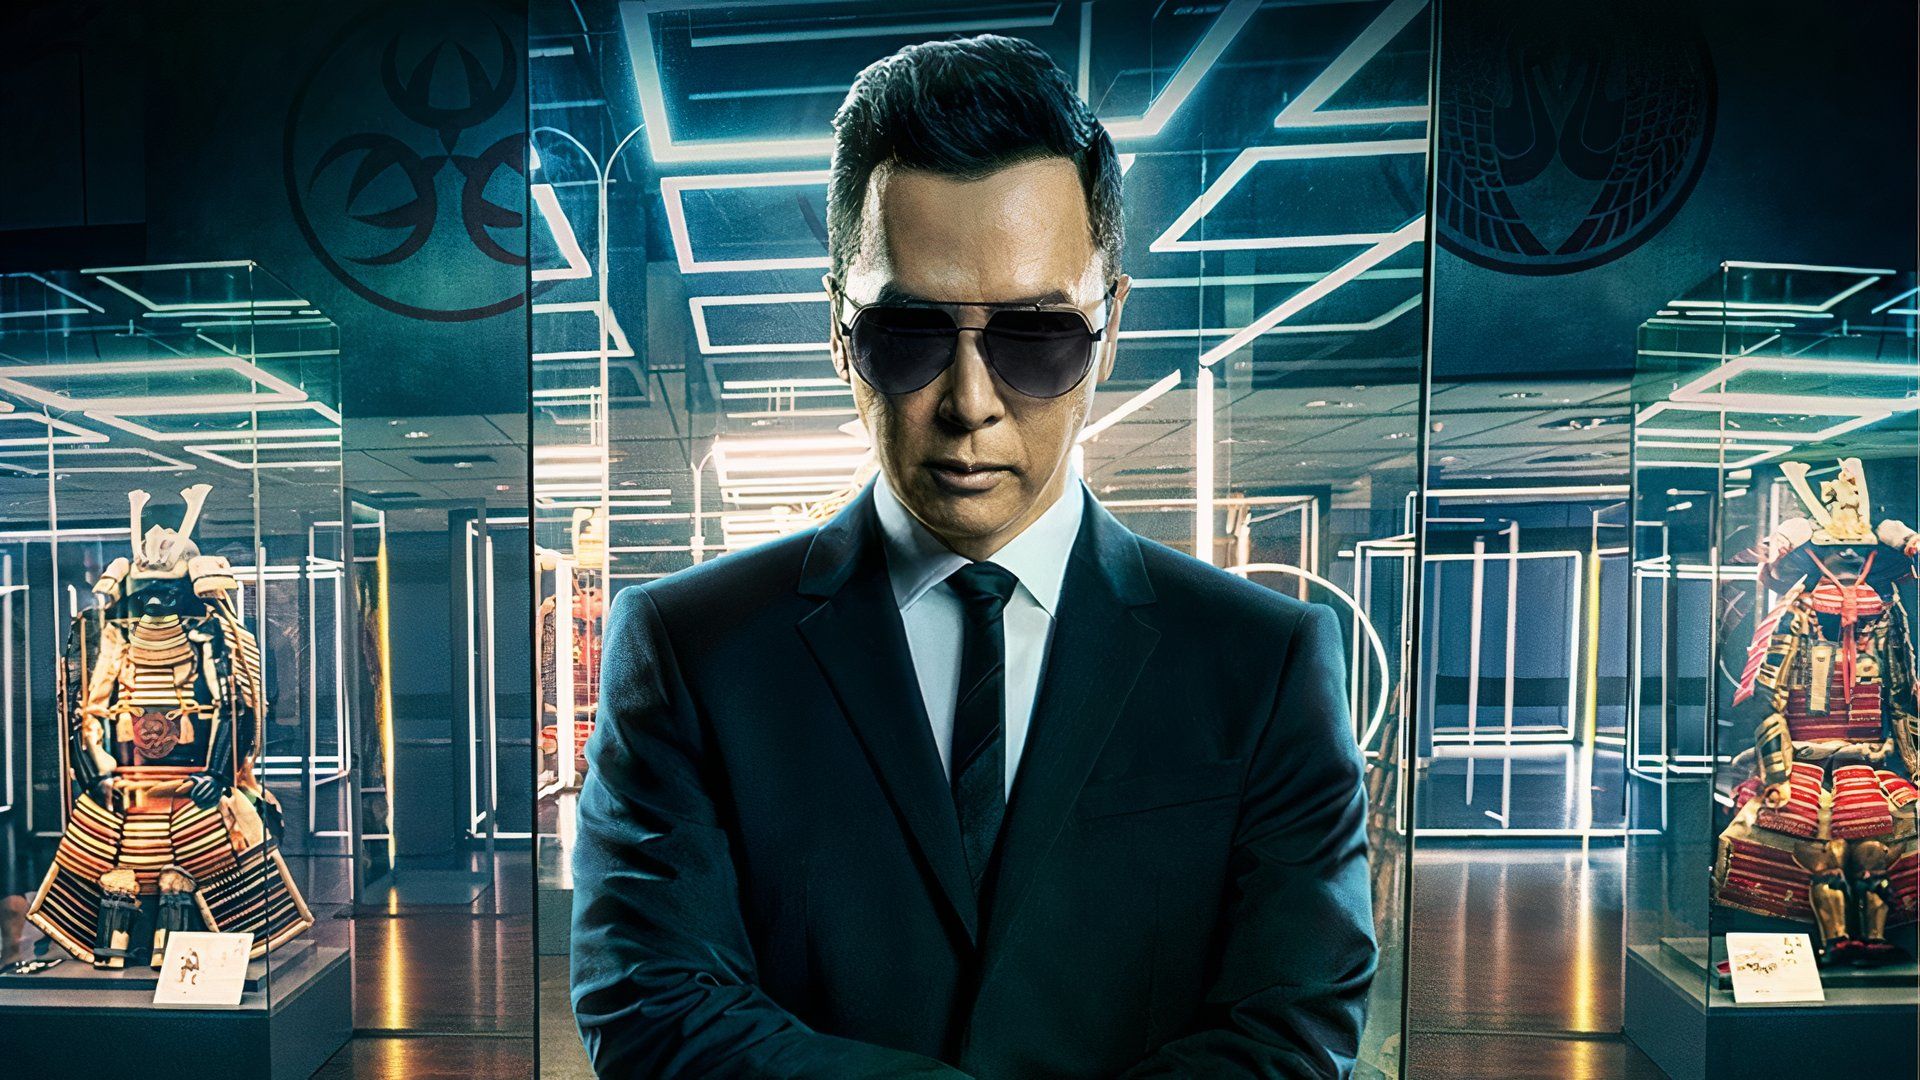 Donnie Yen as Caine in John Wick 4.